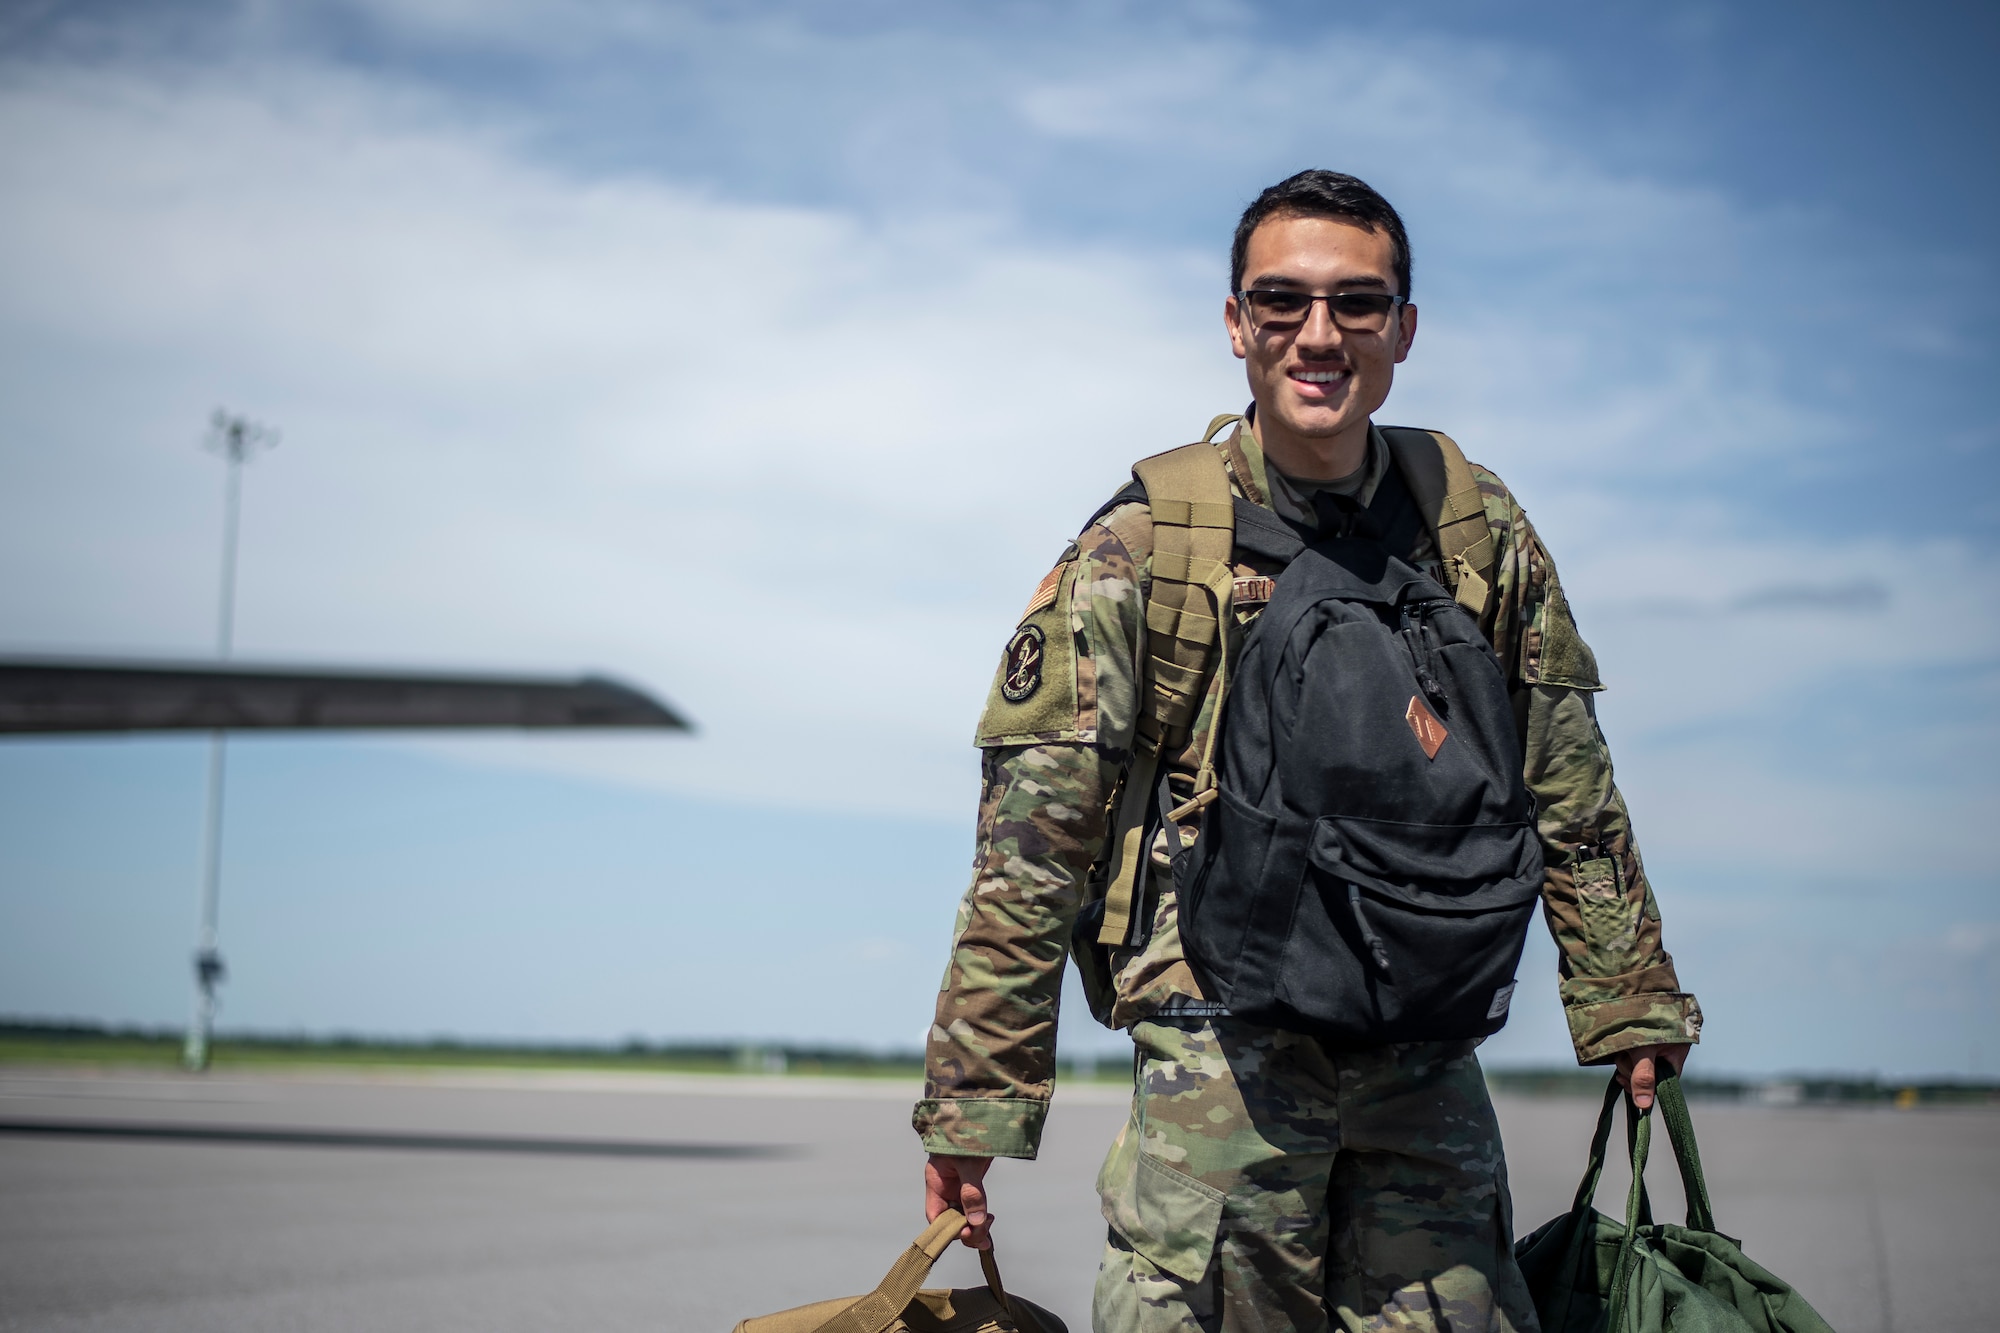 A maintenance specialist from the 6th Maintenance Group smiles after returning home from deployment at MacDill Air Force Base, Florida, Sept. 27, 2021.